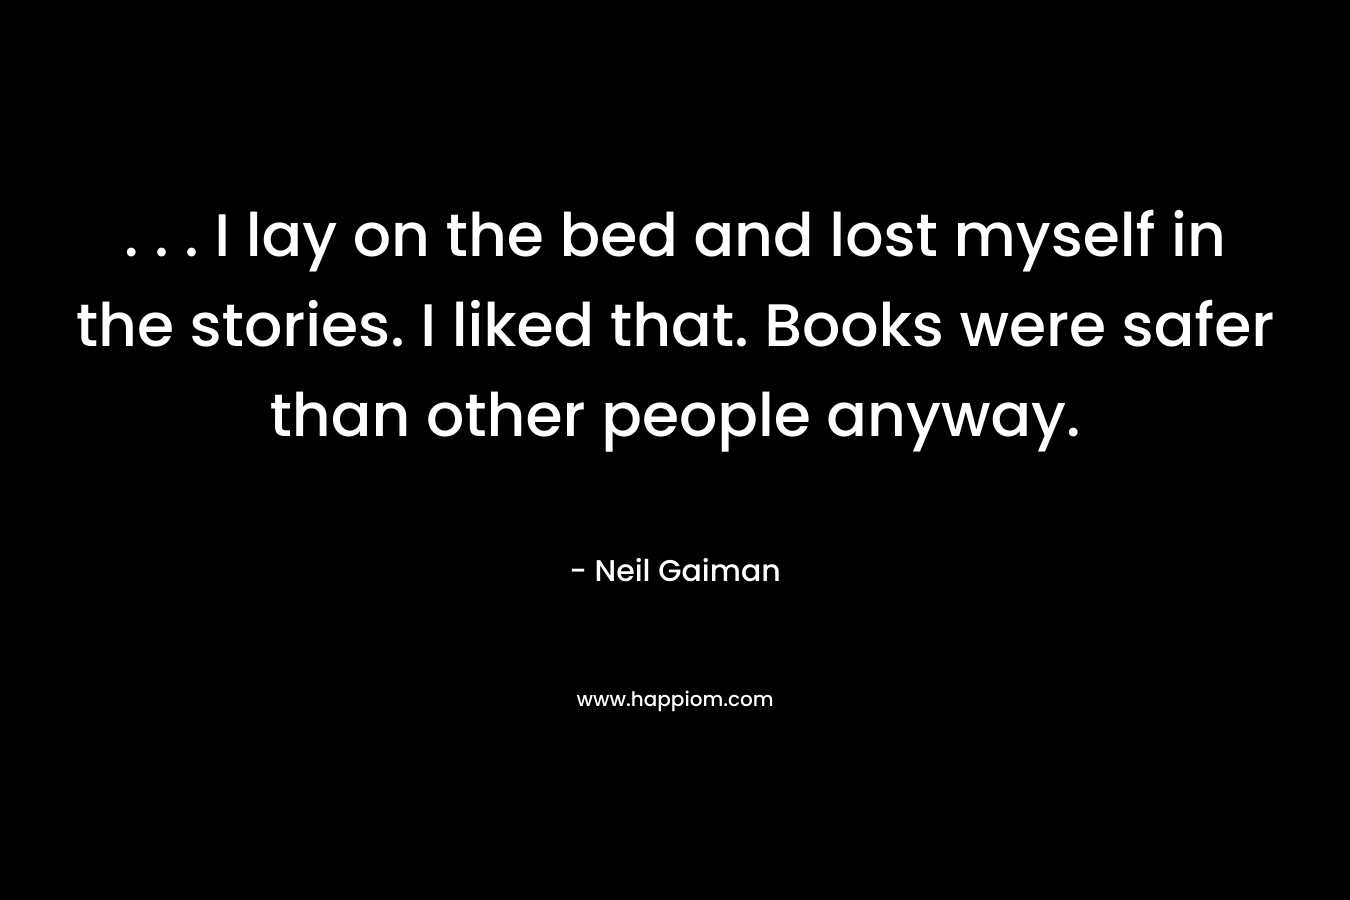 . . . I lay on the bed and lost myself in the stories. I liked that. Books were safer than other people anyway.